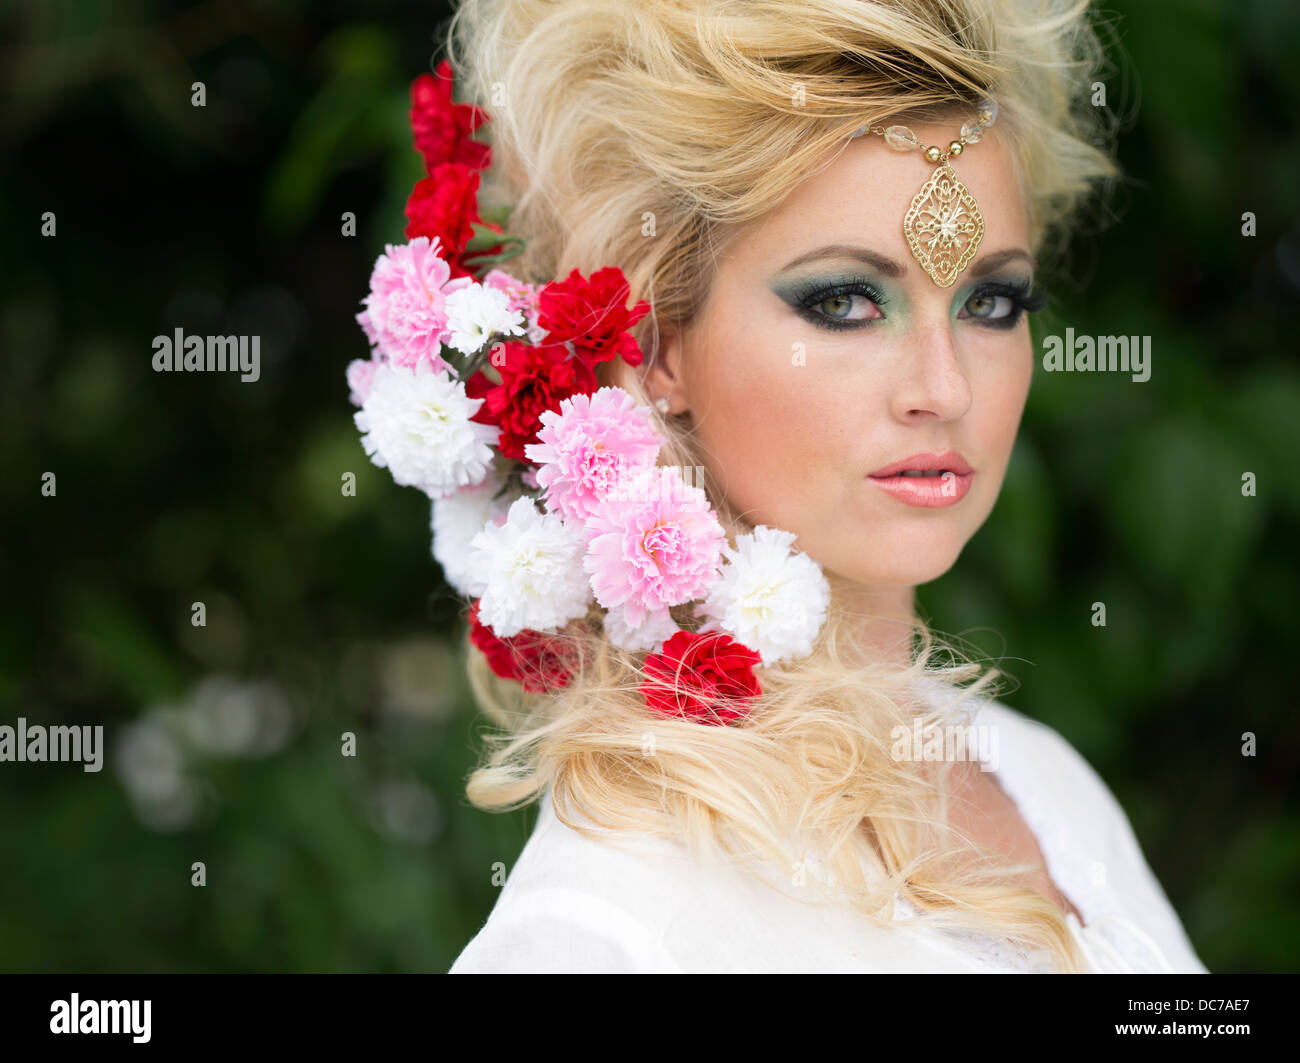 Beautiful blond Caucasian woman in her twenties with flowers in the hair and jewelry on the forehead Stock Photo